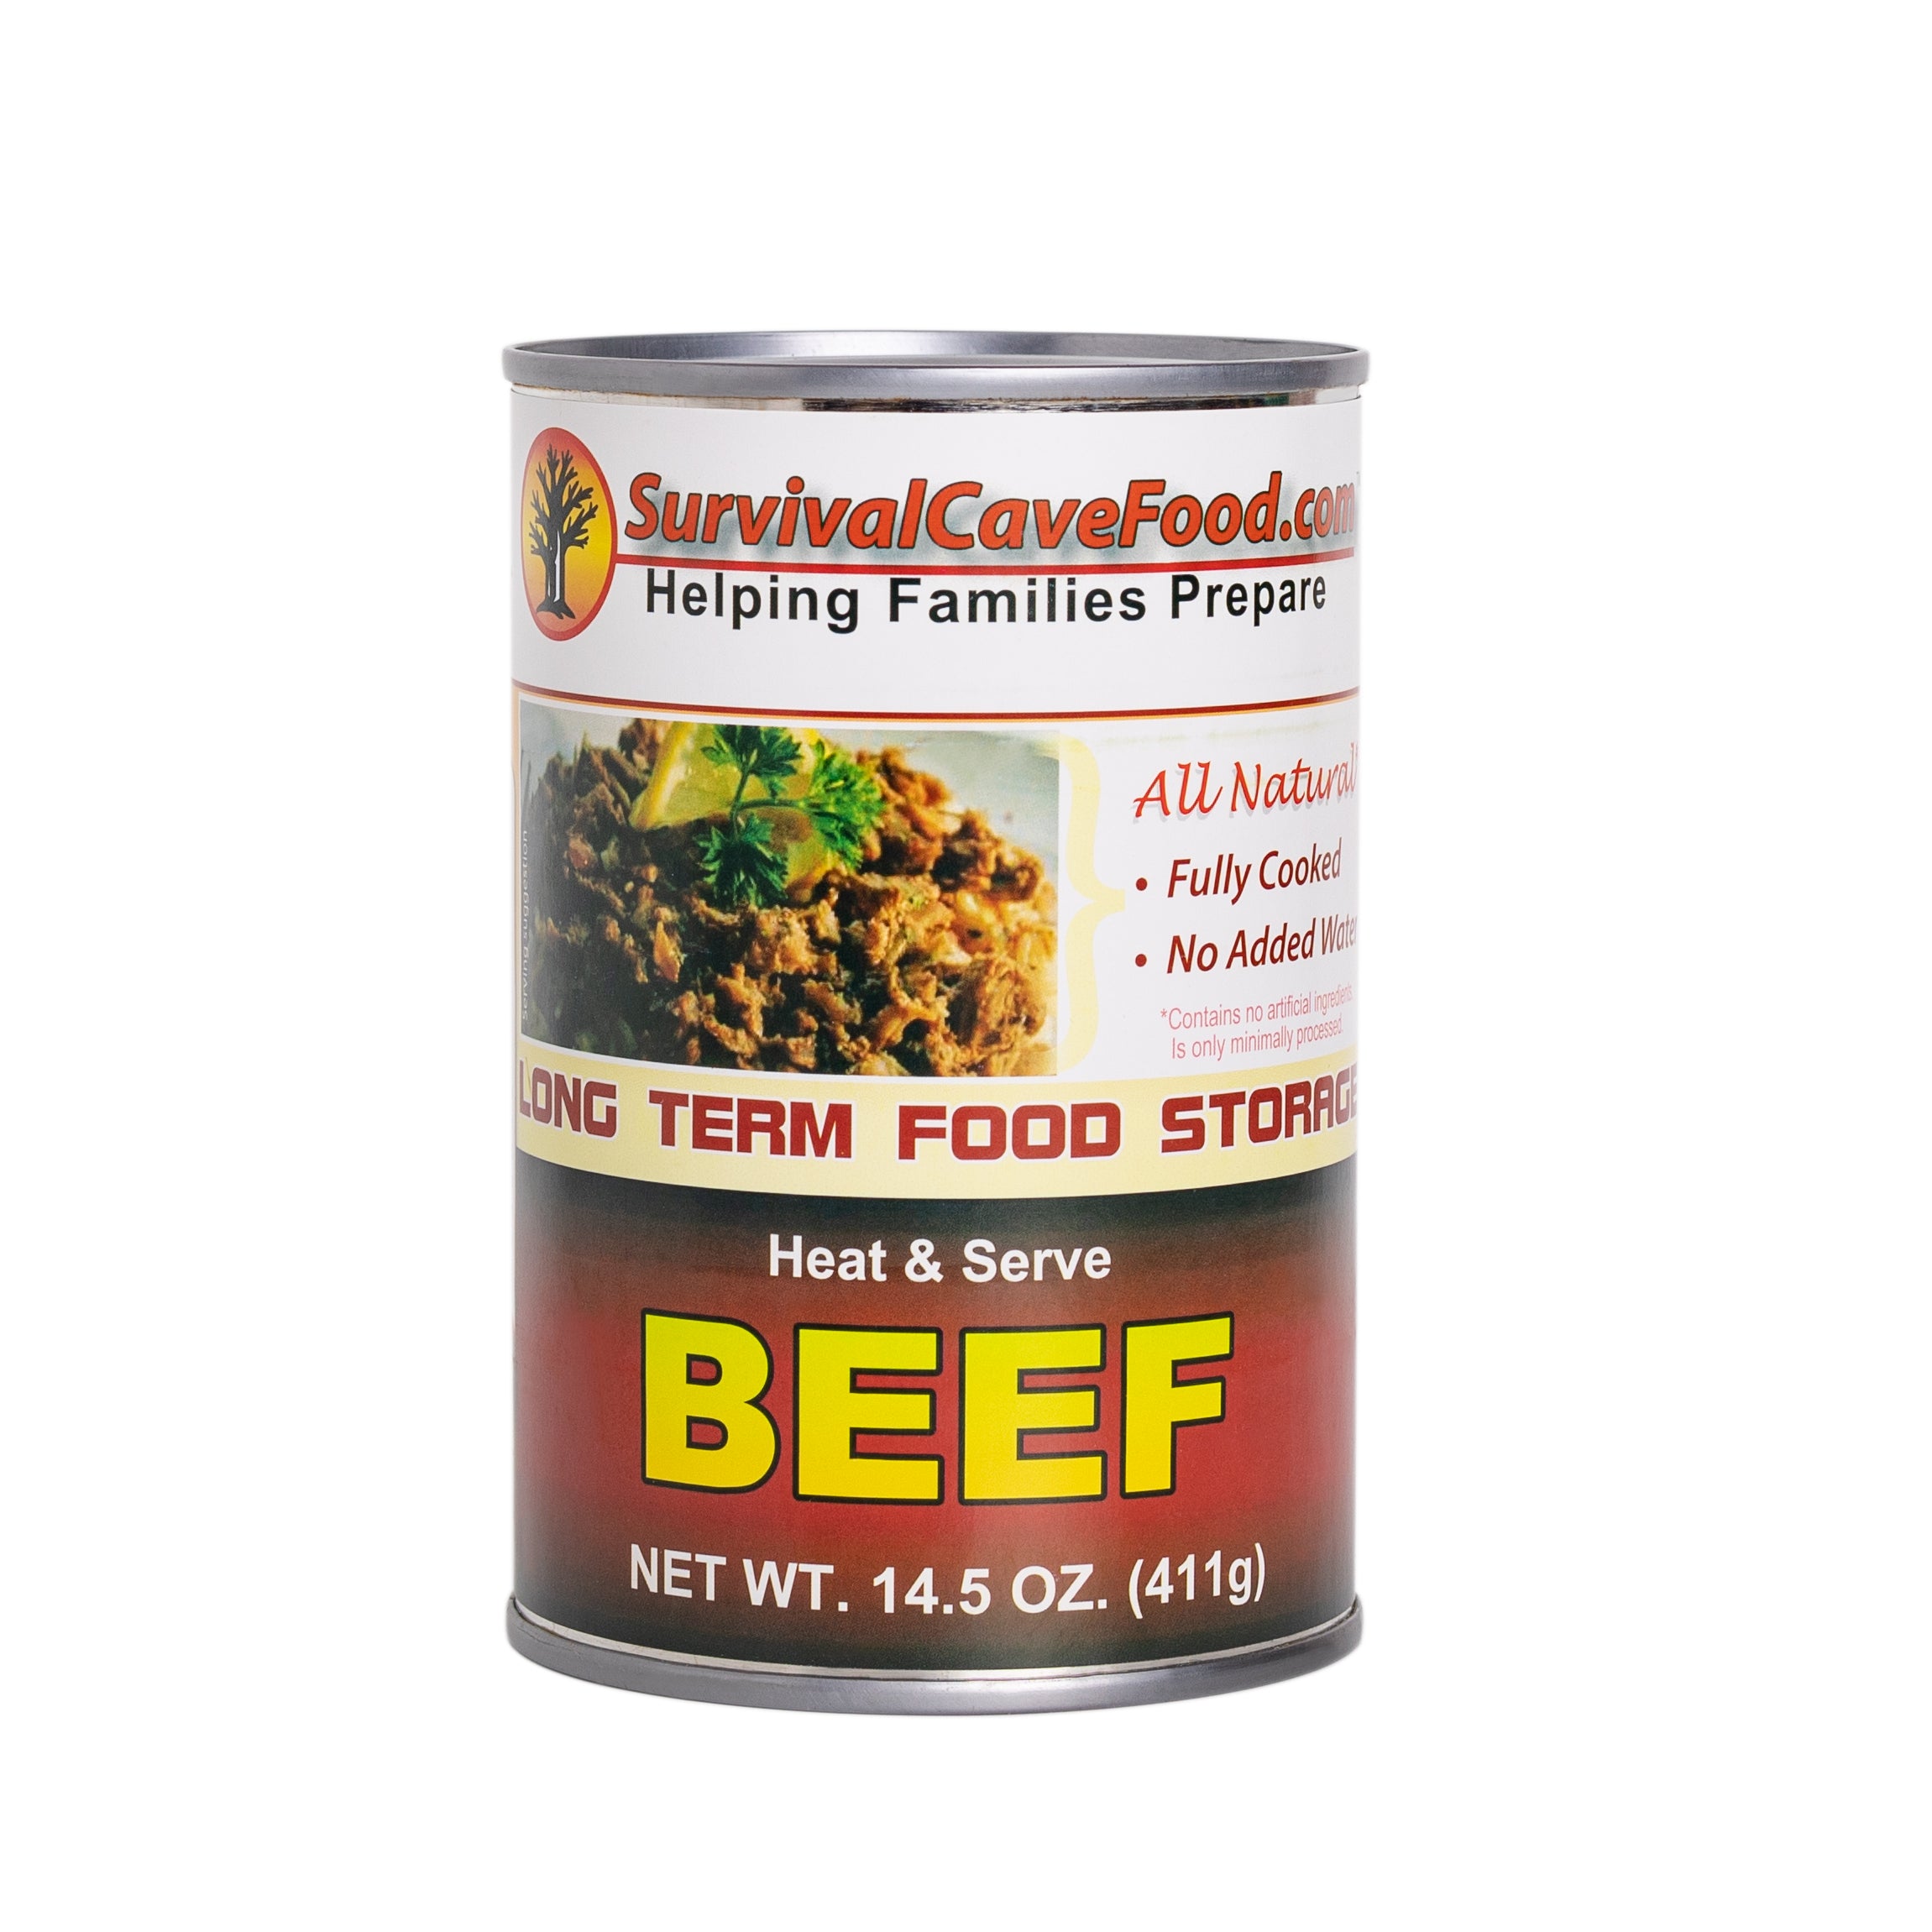 Survival Cave Beef 12 – 14.5 oz Cans – Ready to Eat Canned Meat